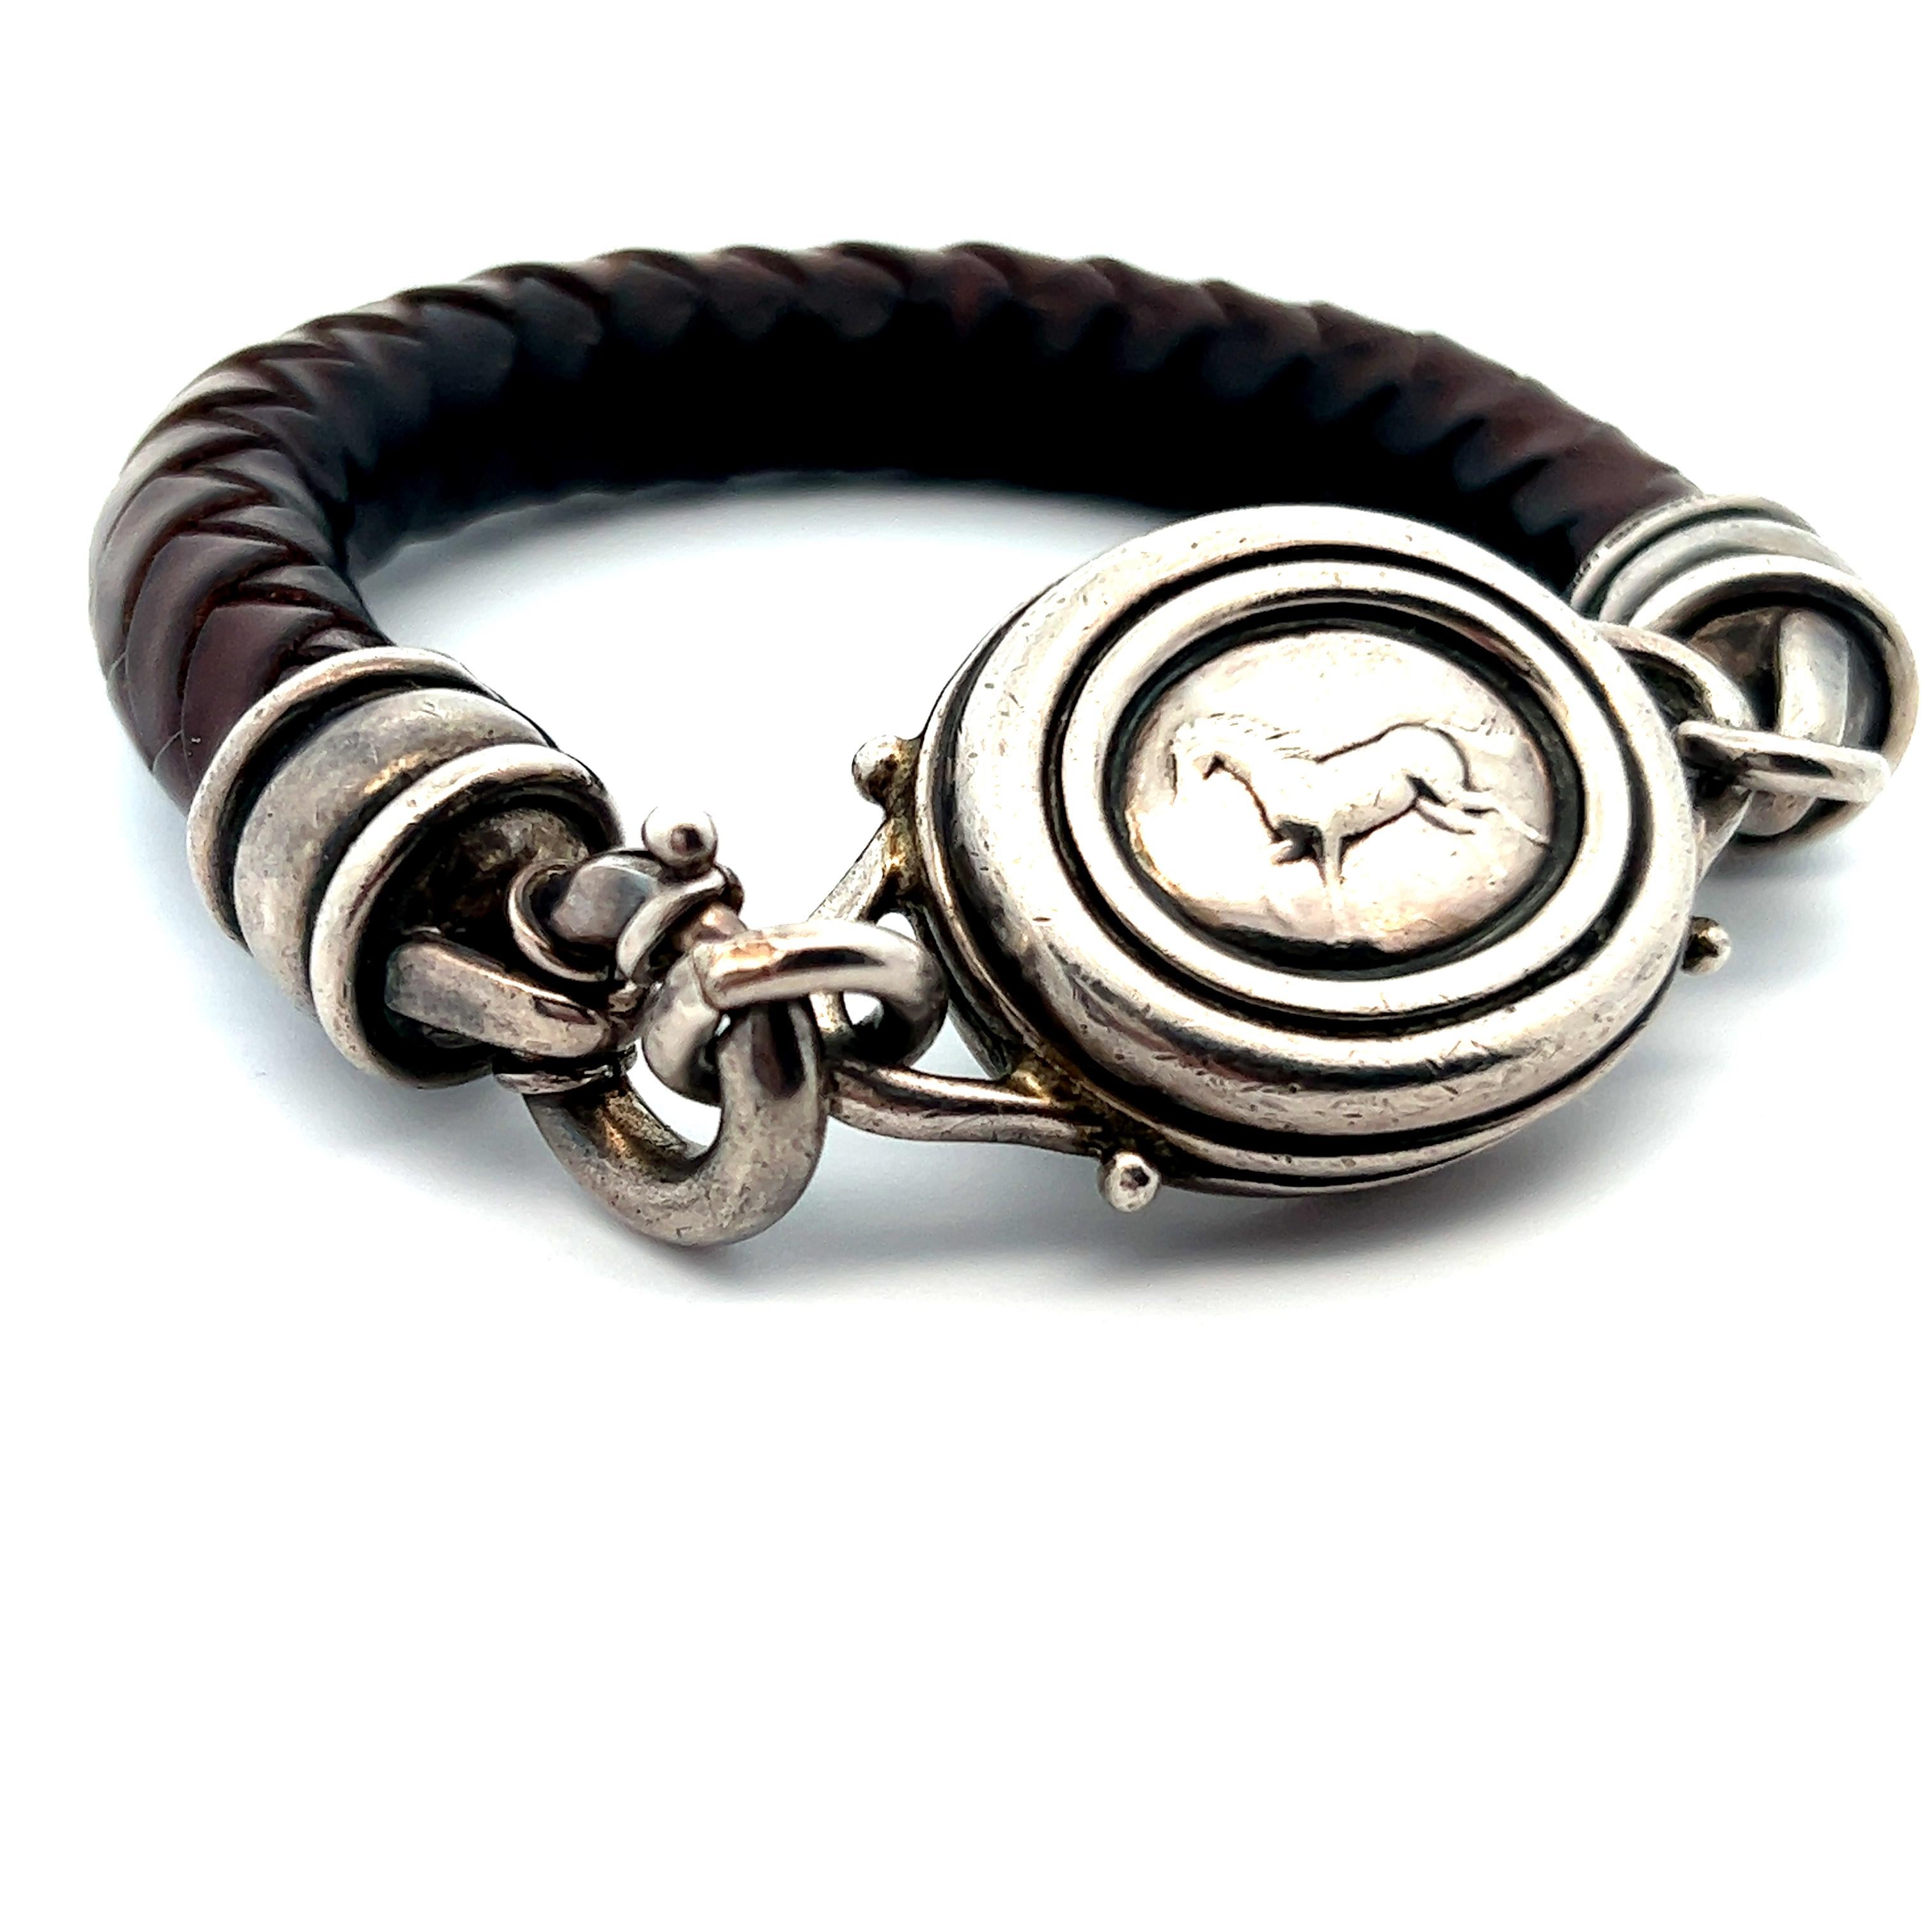 This beautiful sterling silver bracelet from Barry Kieselstein features a woven brown leather and a marvelous horse motif. The bracelet has a chunky design due to the wide leather weave pattern that gives this bracelet commanding presence on the